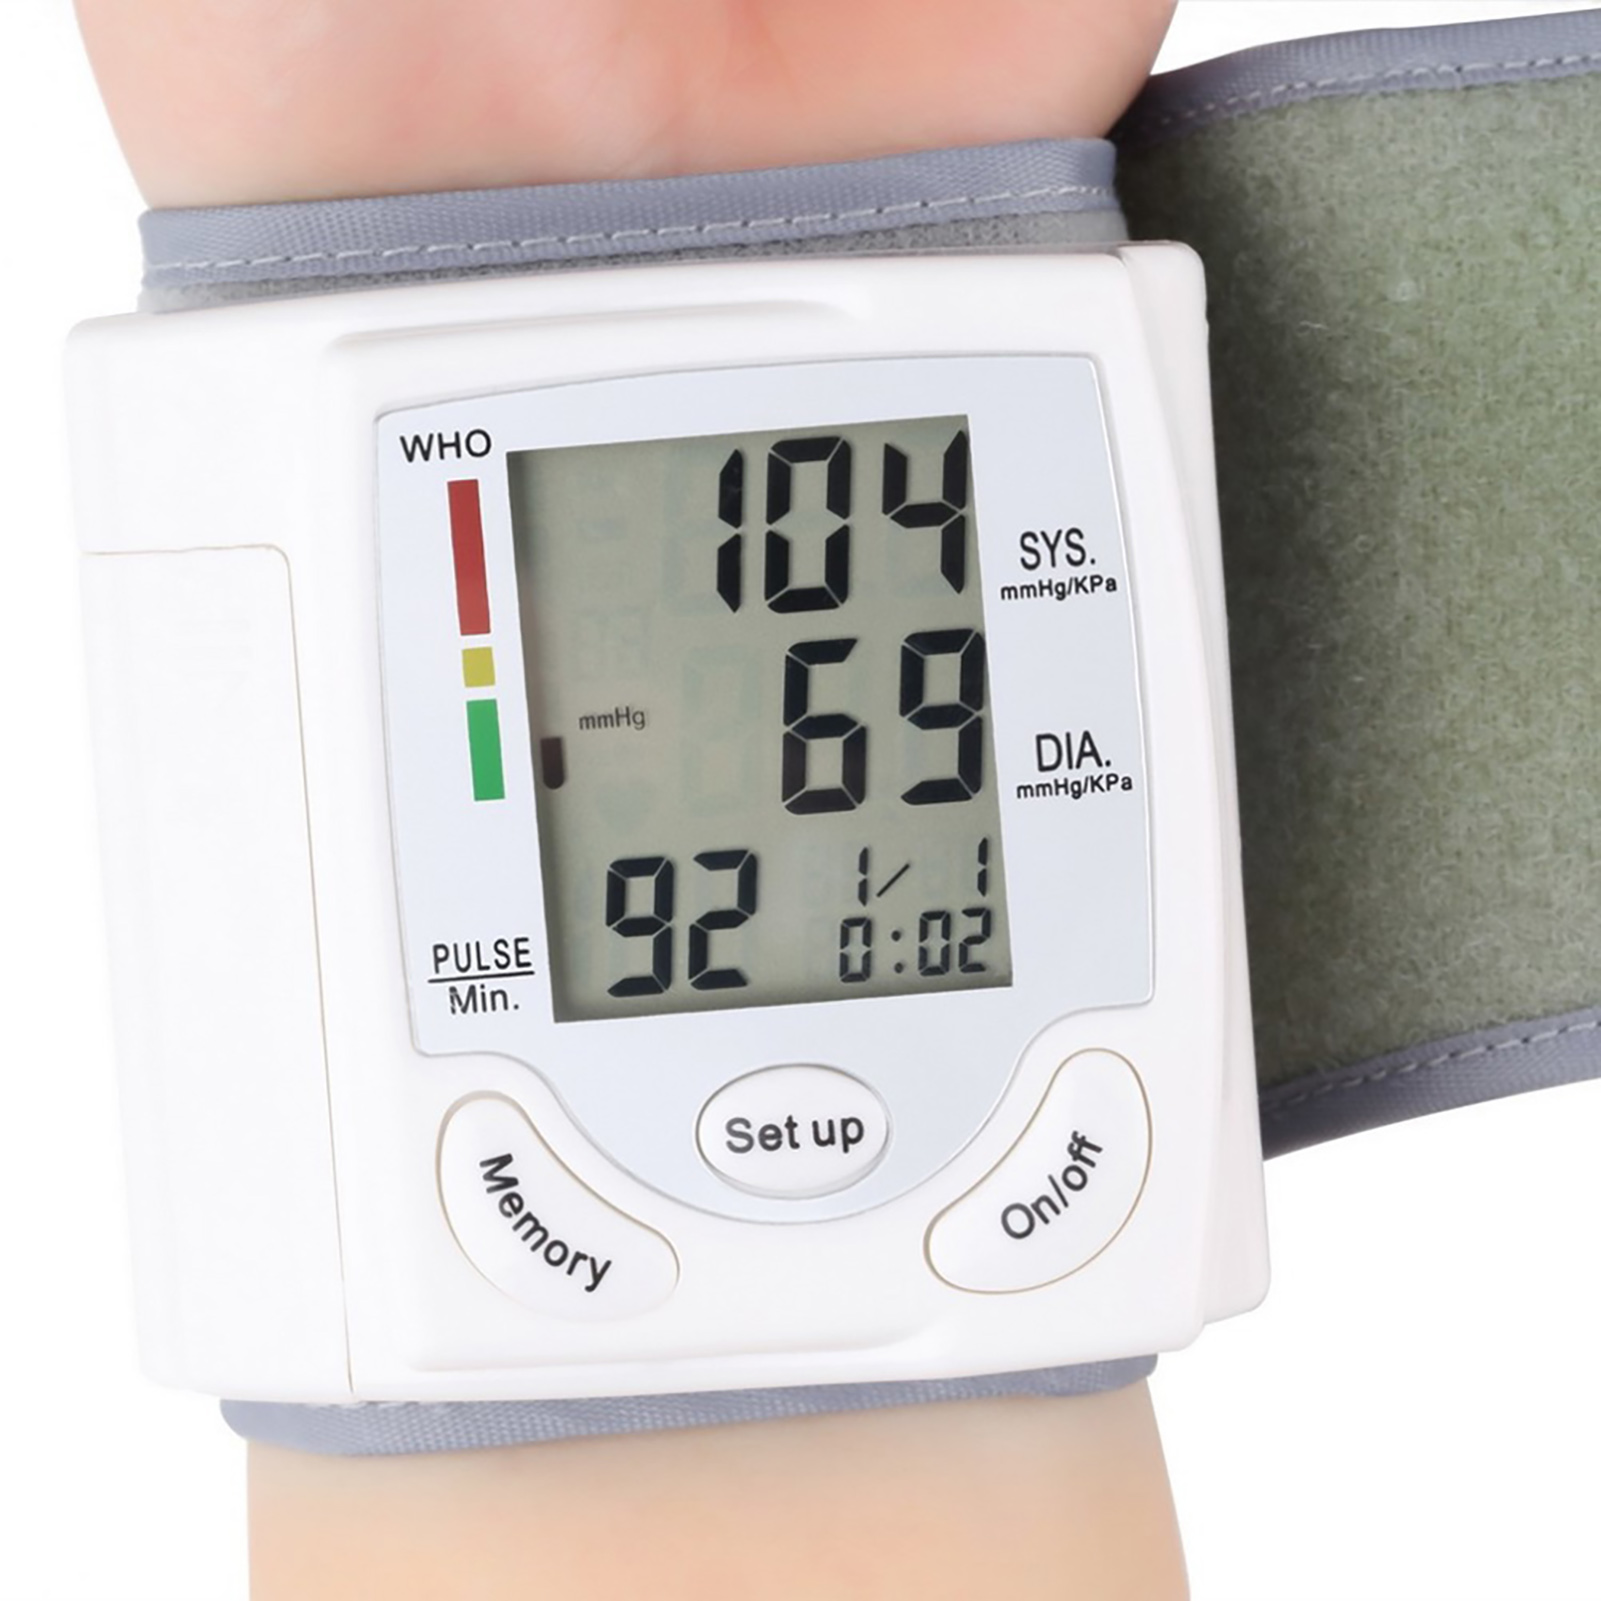 AURORA TRADE Blood Pressure Monitor-Wrist Cuff Automatic Digital Blood Pressure Meter, Accurate BP Machine for Home Use, Large Display, Hypertension & Irregular Heartbeat Detector - image 1 of 4